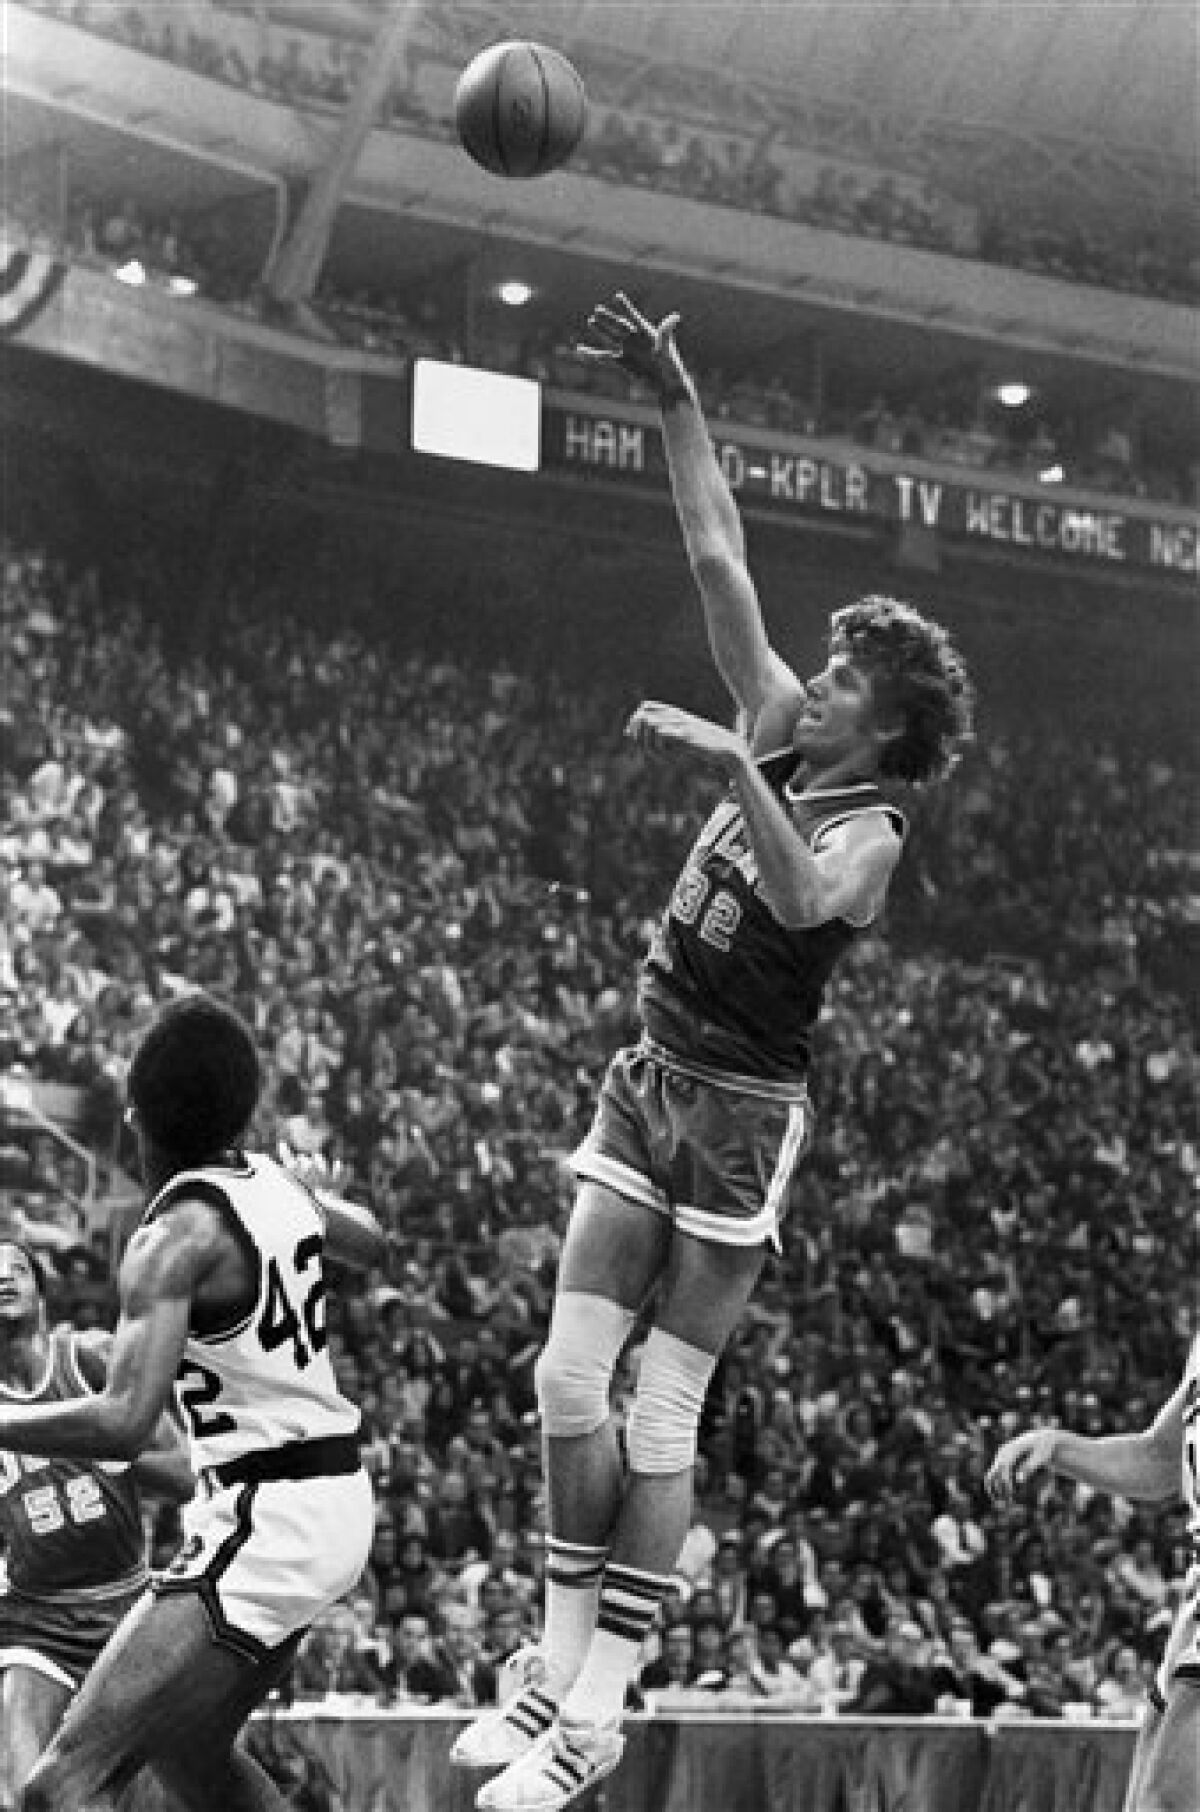 FILE - This March 26, 1973, file photo shows UCLA center Bill Walton shooting for two of his record 44 points against Memphis State in the final game of the NCAA basketball tournament in St. Louis, Mo. The 57-year-old Walton said that his former coach _ at the age of 99 _ was aware of UConn's streak. He thinks John Wooden would be proud of what UConn coach Auriemma has accomplished, as they have similiar coaching traits. (AP Photo, File)